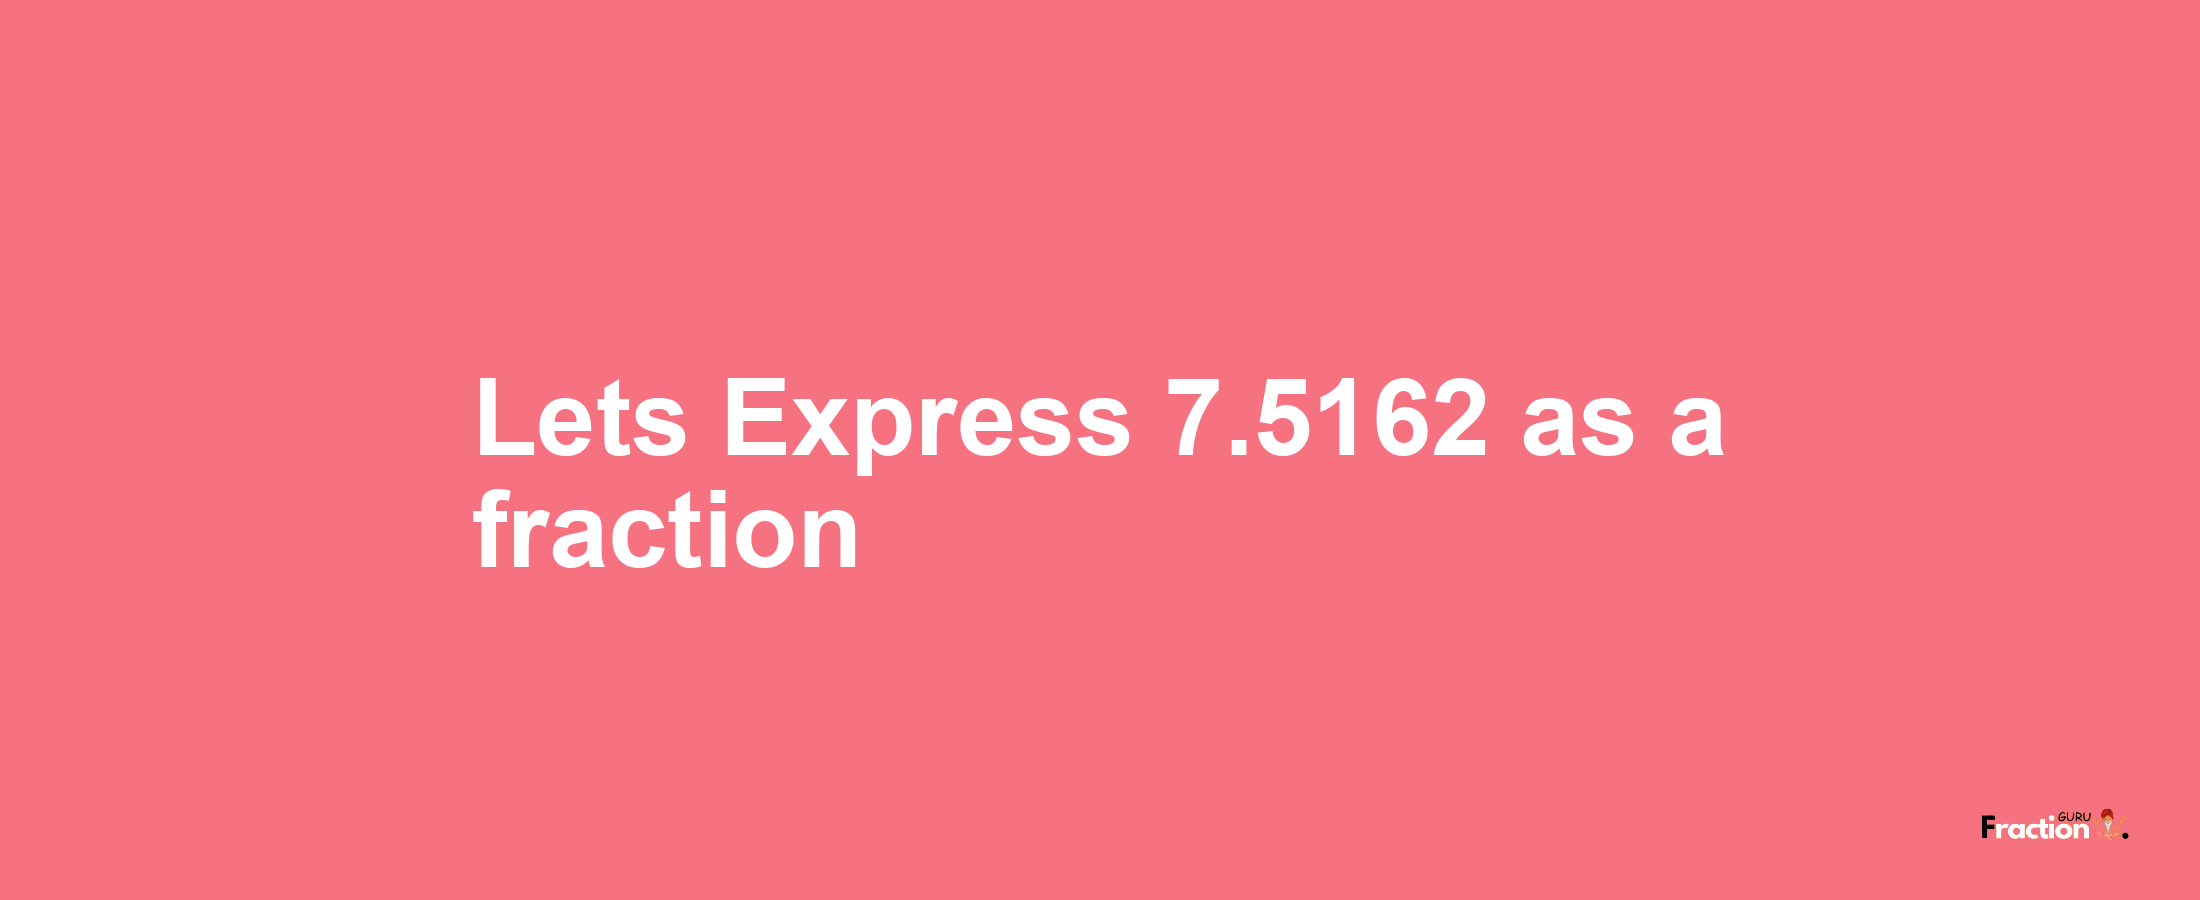 Lets Express 7.5162 as afraction